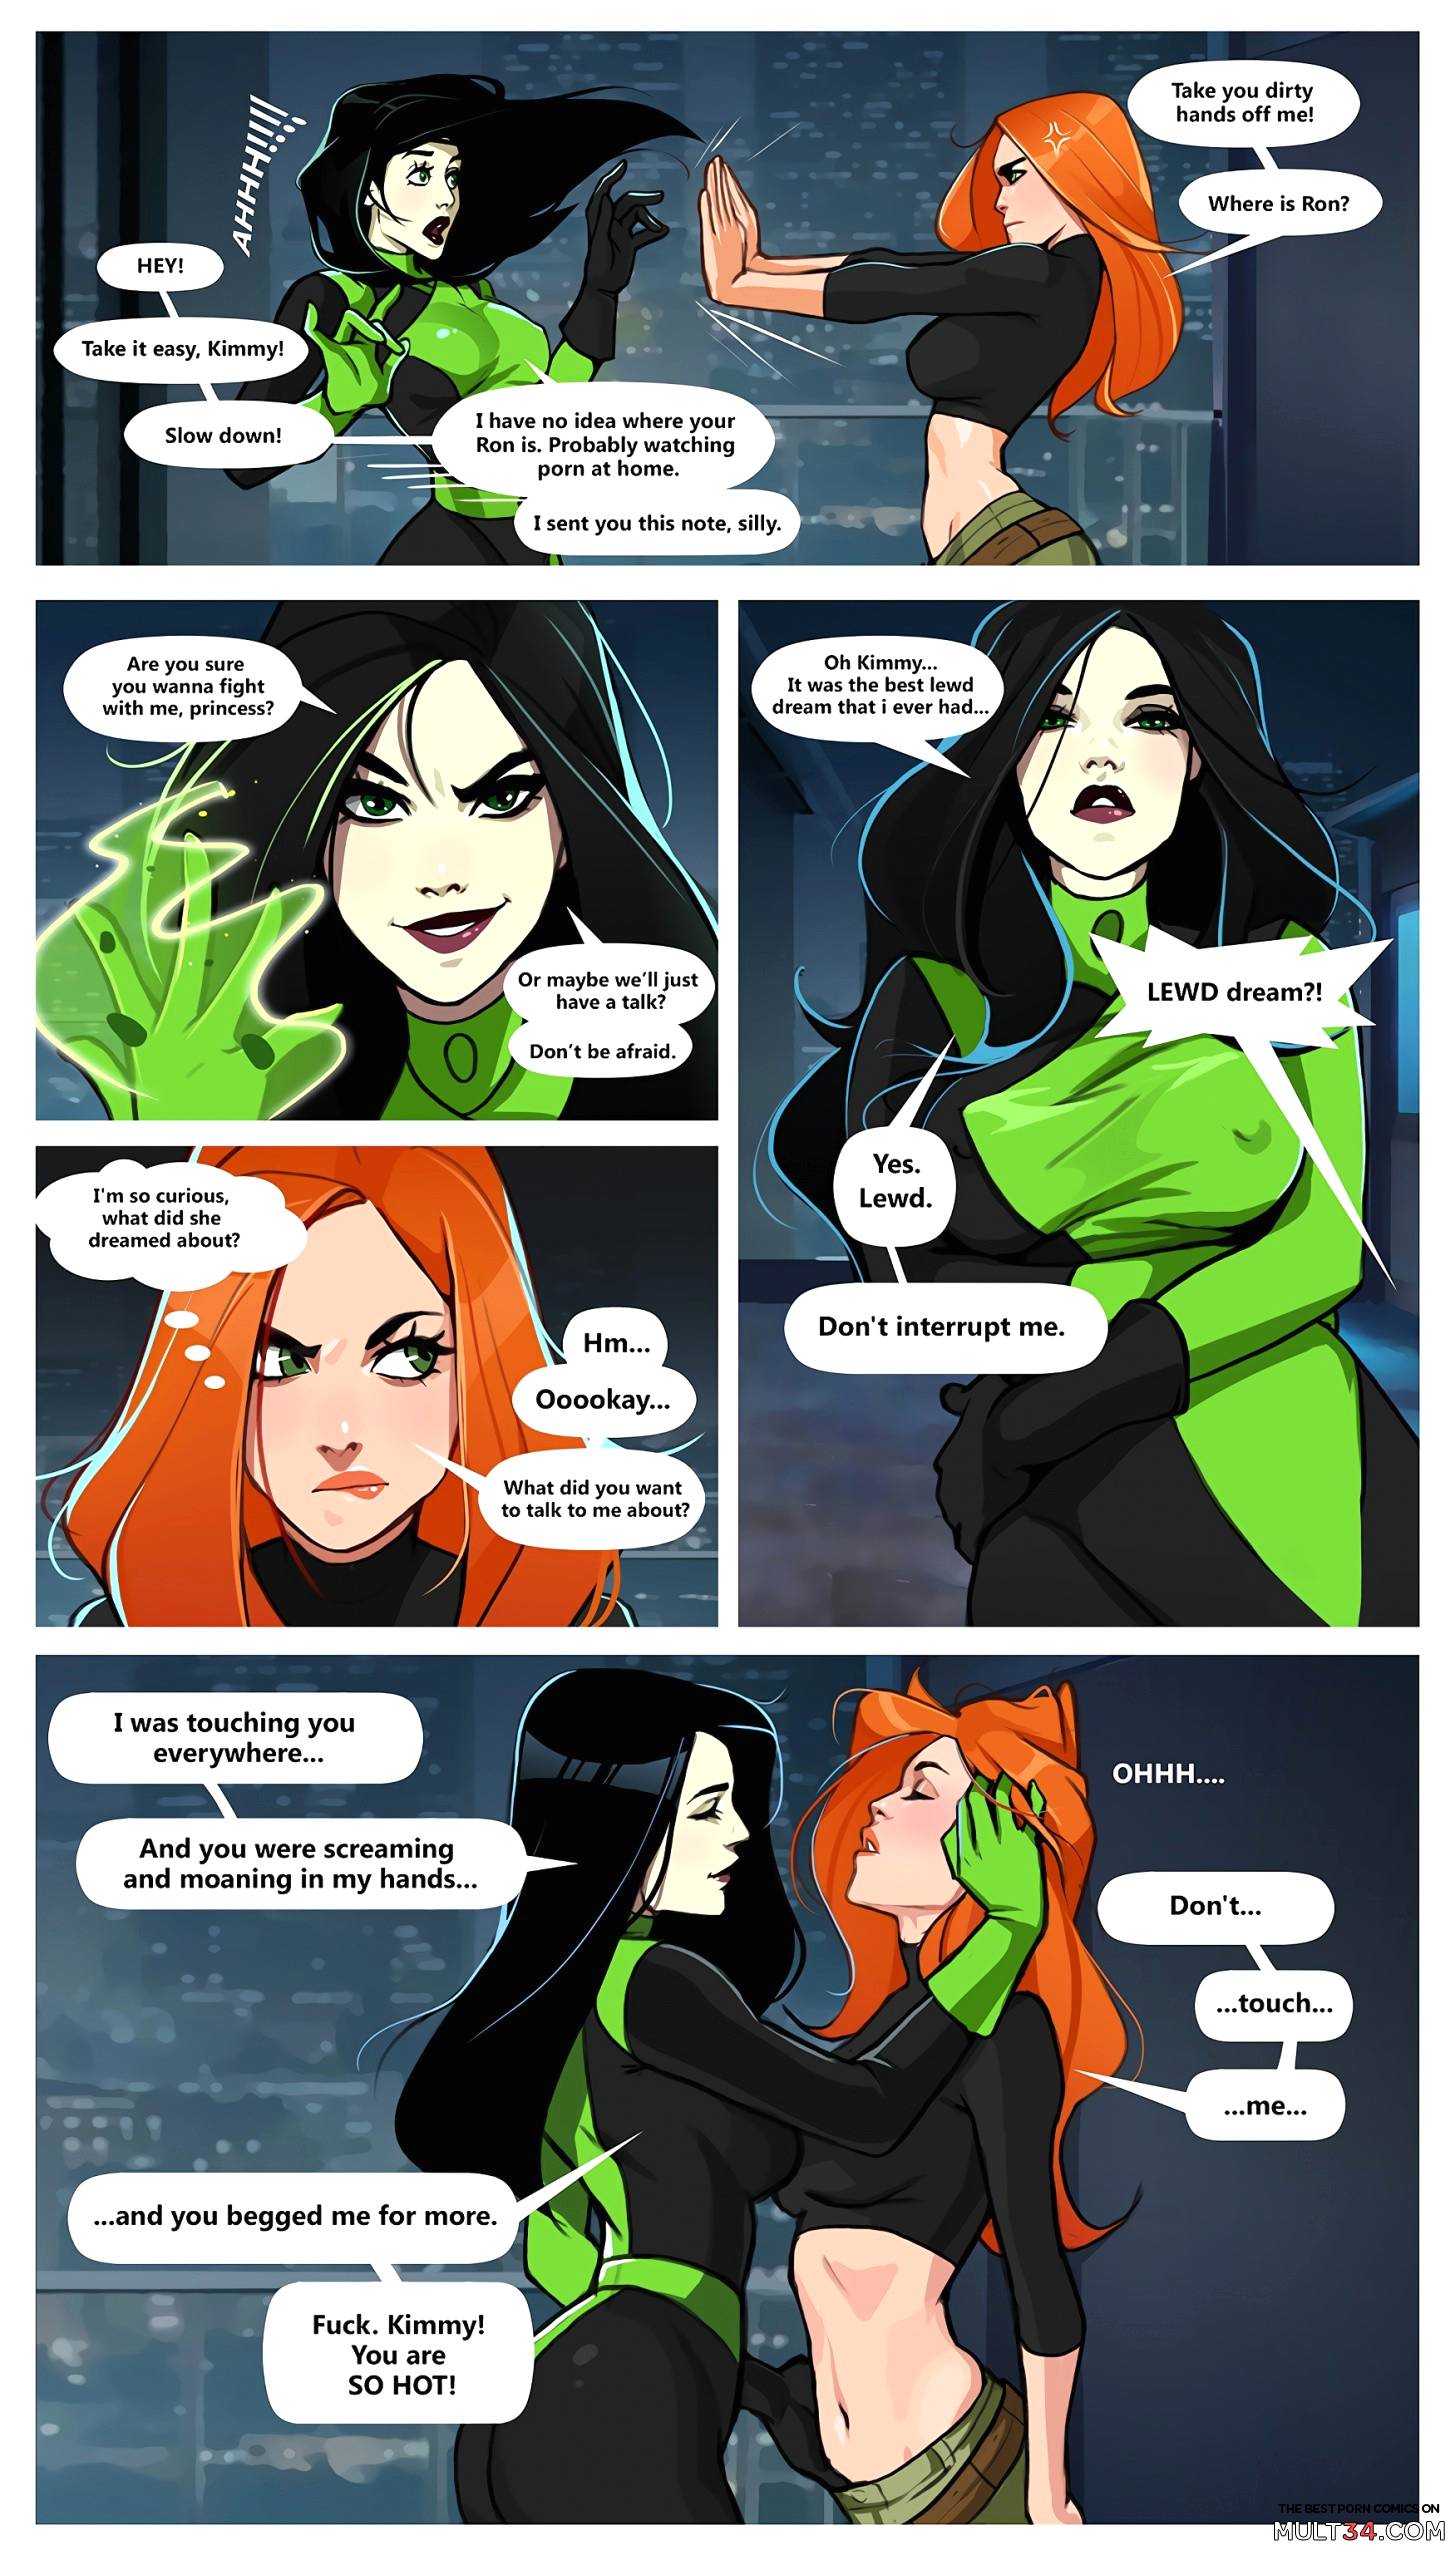 Kim and Shego Date on the roof page 2